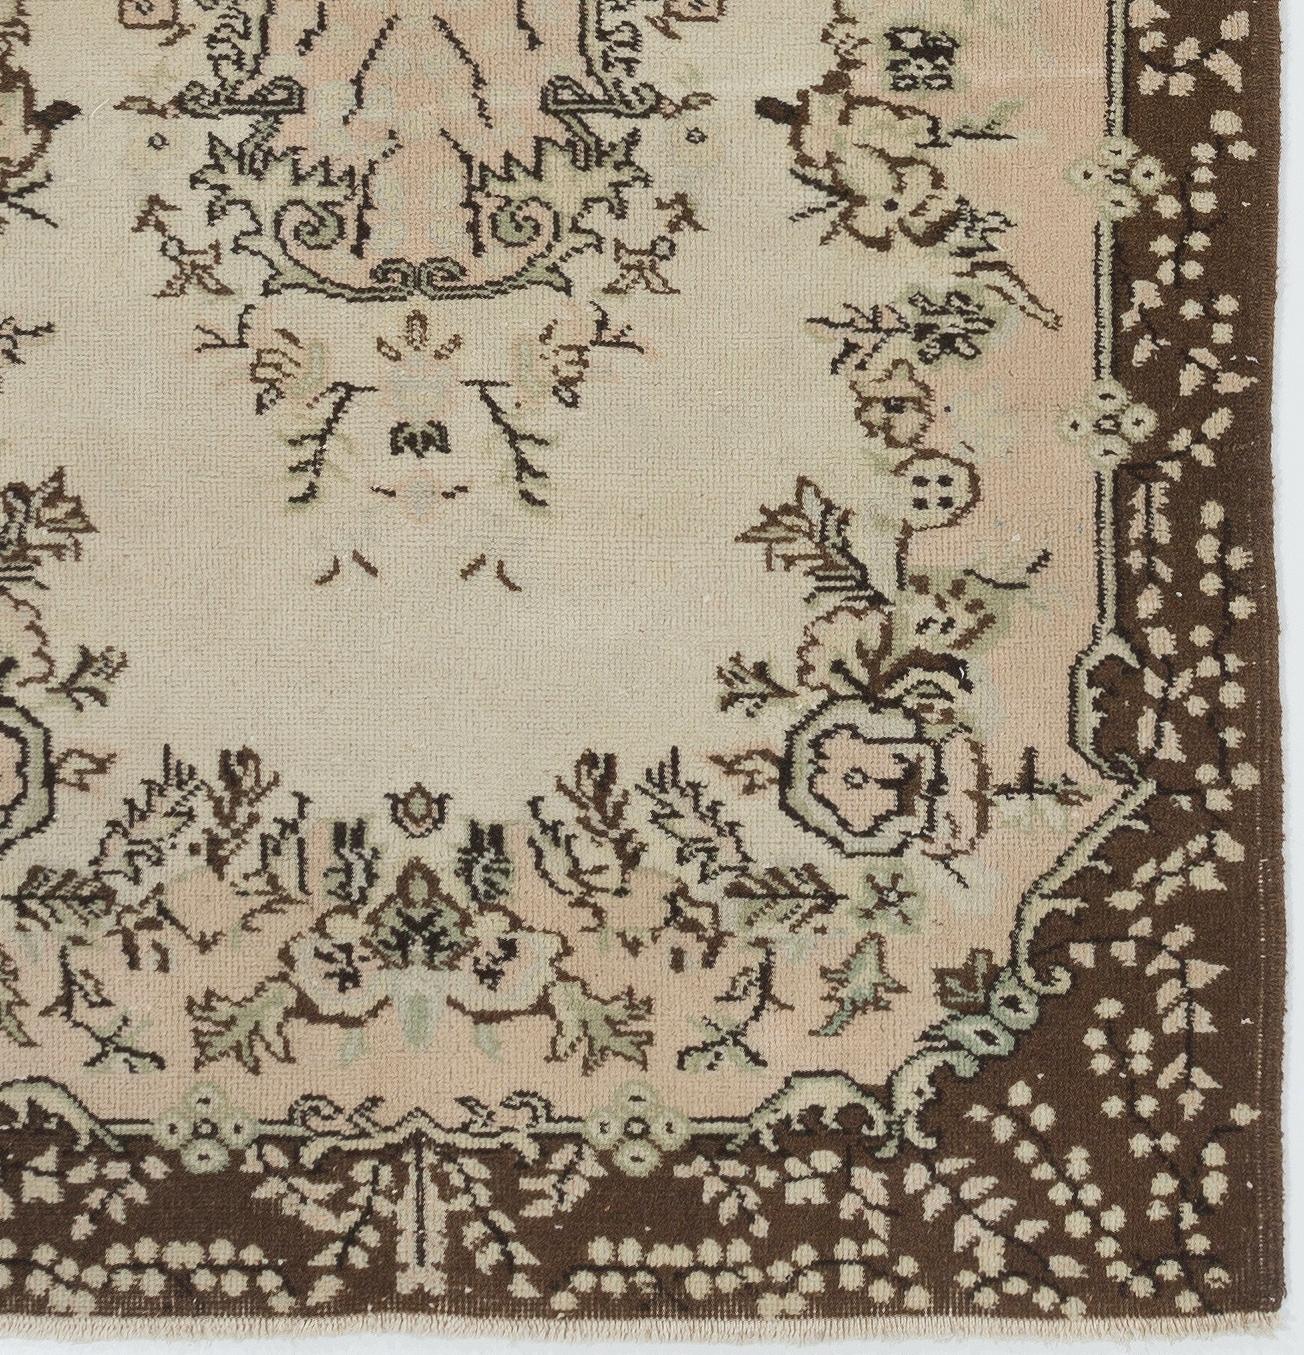 Turkish 4x7 Ft Hand-Knotted Vintage Floral Garden Design Anatolian Accent Rug. ca 1960 For Sale